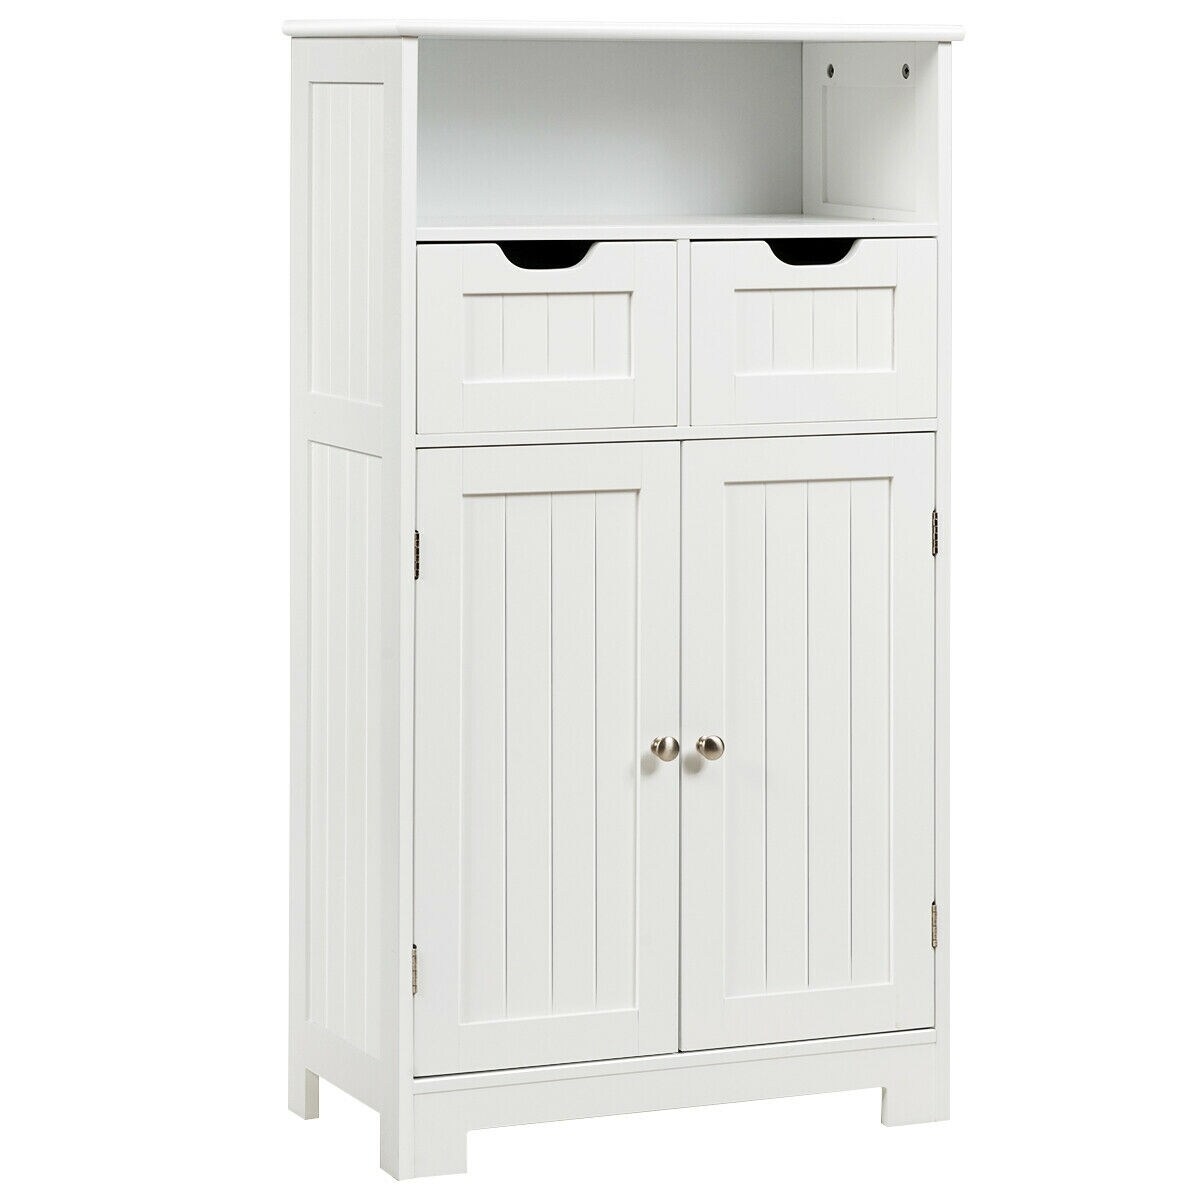 https://ak1.ostkcdn.com/images/products/is/images/direct/2bef4cf2502f3af2c8f235d4f1d1791f311f999f/Bathroom-Wooden-Side-Cabinet-with-2-Drawers-and-2-Doors-White.jpg